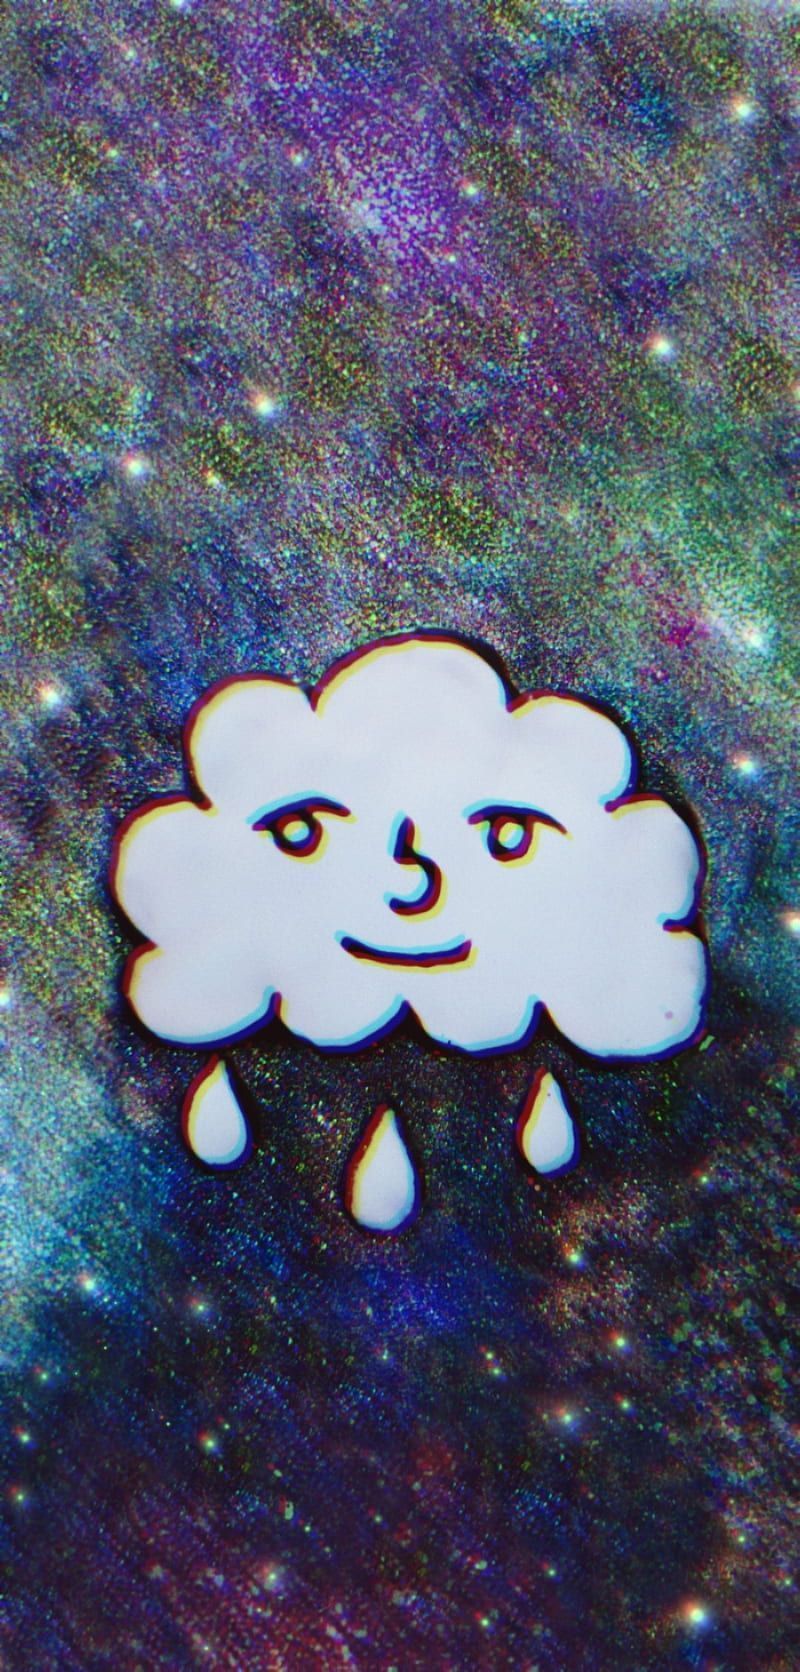 A cartoon cloud crying raindrops on a colorful background - Depression